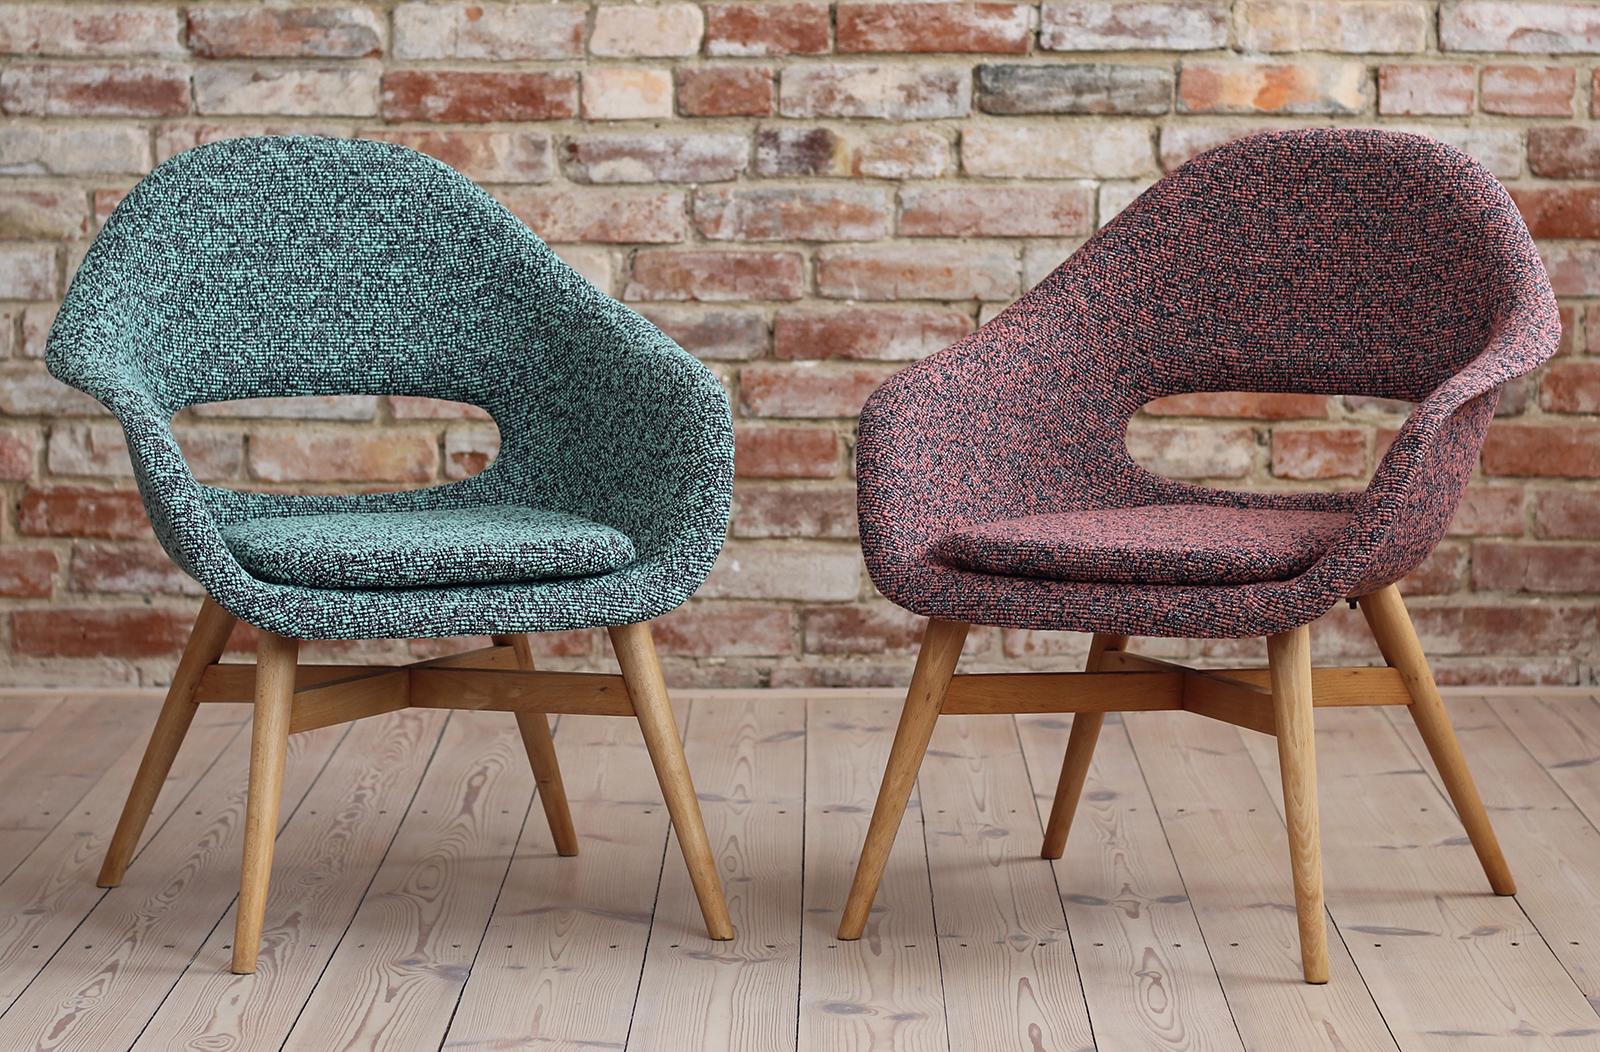 This set of 2 lounge chairs was designed in 1950s by Miroslav Navrátil in Czech Republic. It features a fiberglass seating shell and a wooden base. The piece has been renovated and reupholstered with high-quality fabric from latest collection of